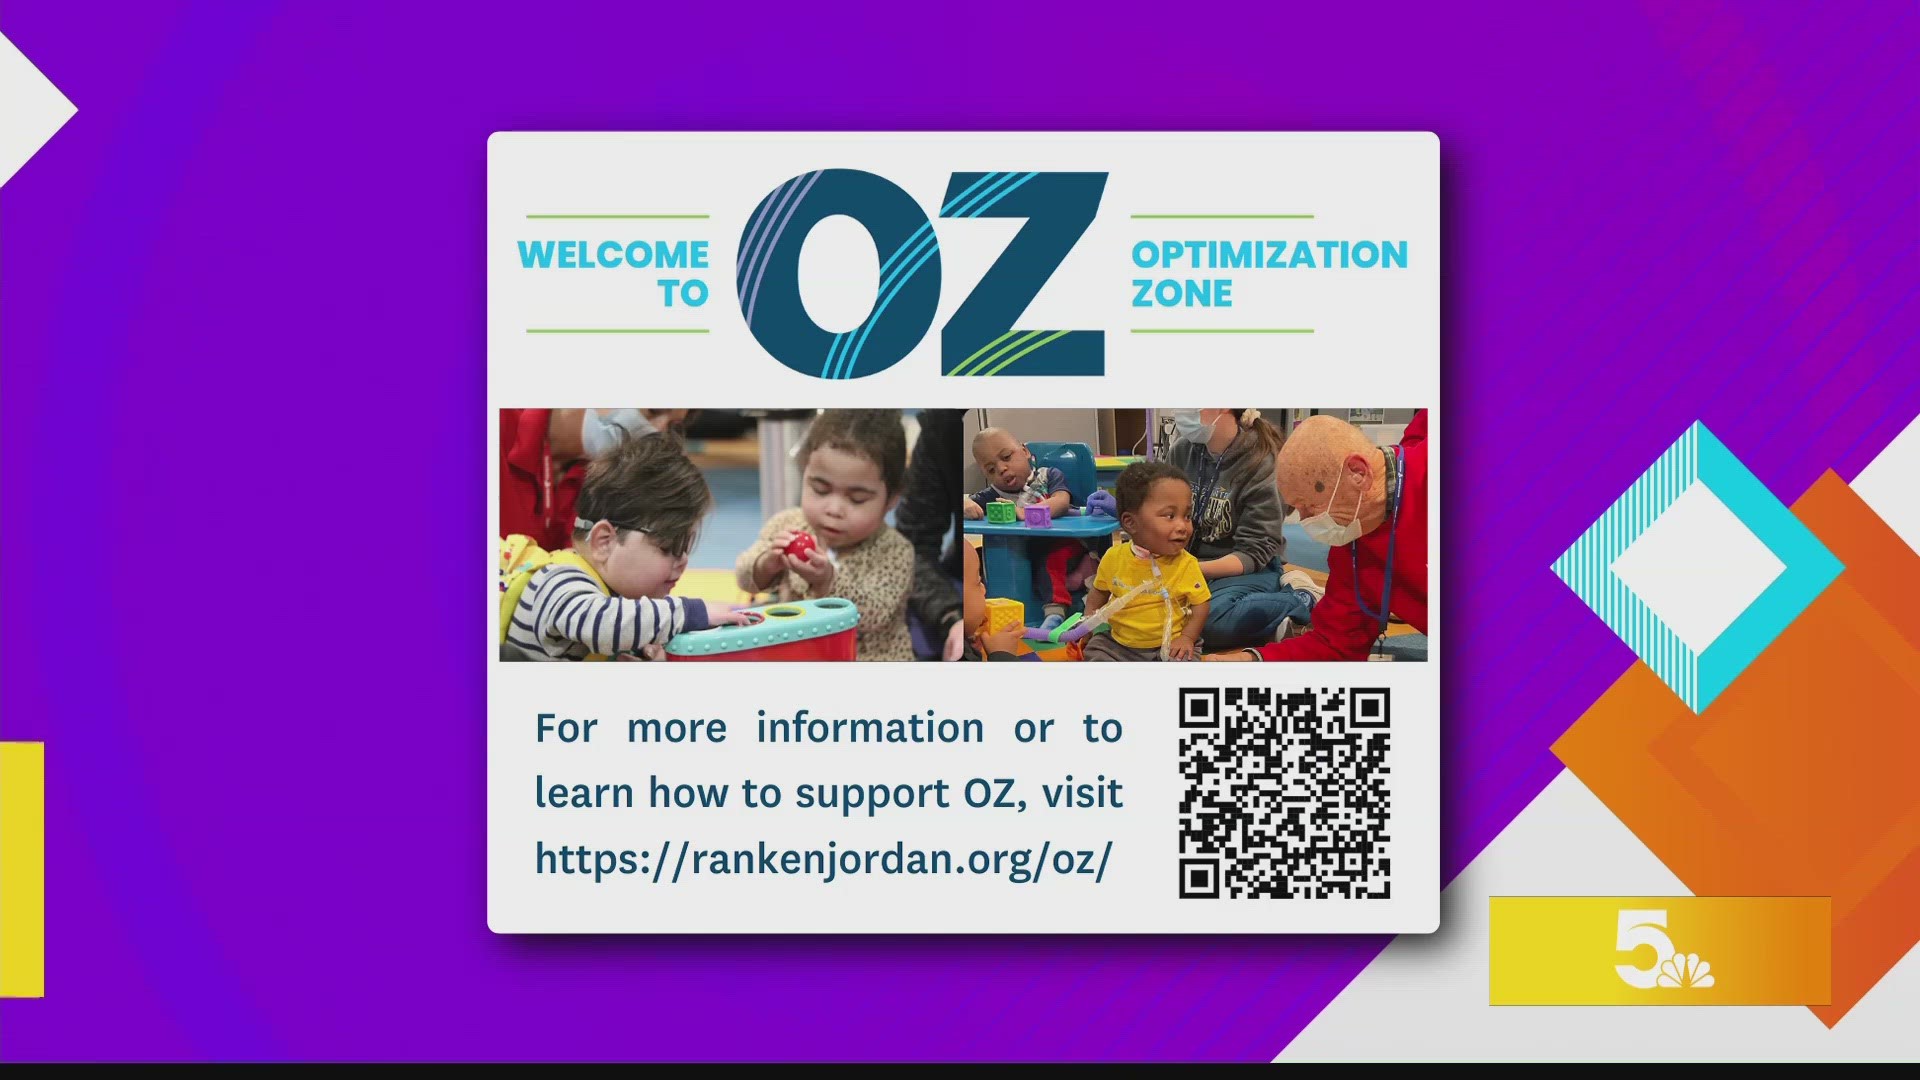 A year ago, Ranken Jordan launched an innovative program called OZ (Optimization Zone) to ensure children who are in the hospital long-term.